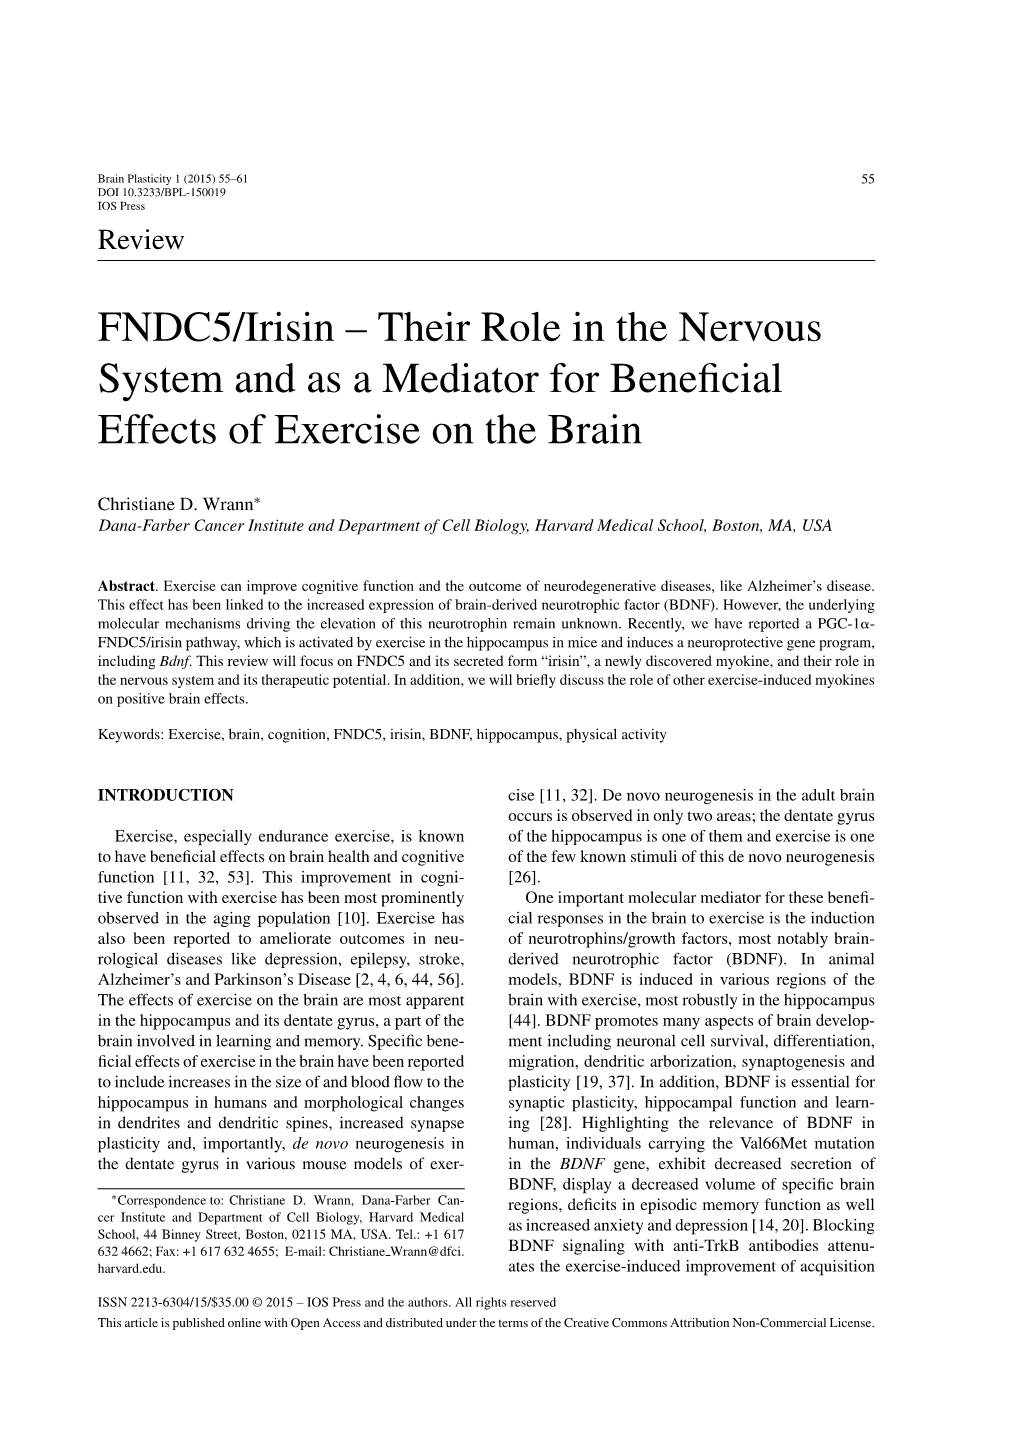 FNDC5/Irisin – Their Role in the Nervous System and As a Mediator for Beneﬁcial Effects of Exercise on the Brain